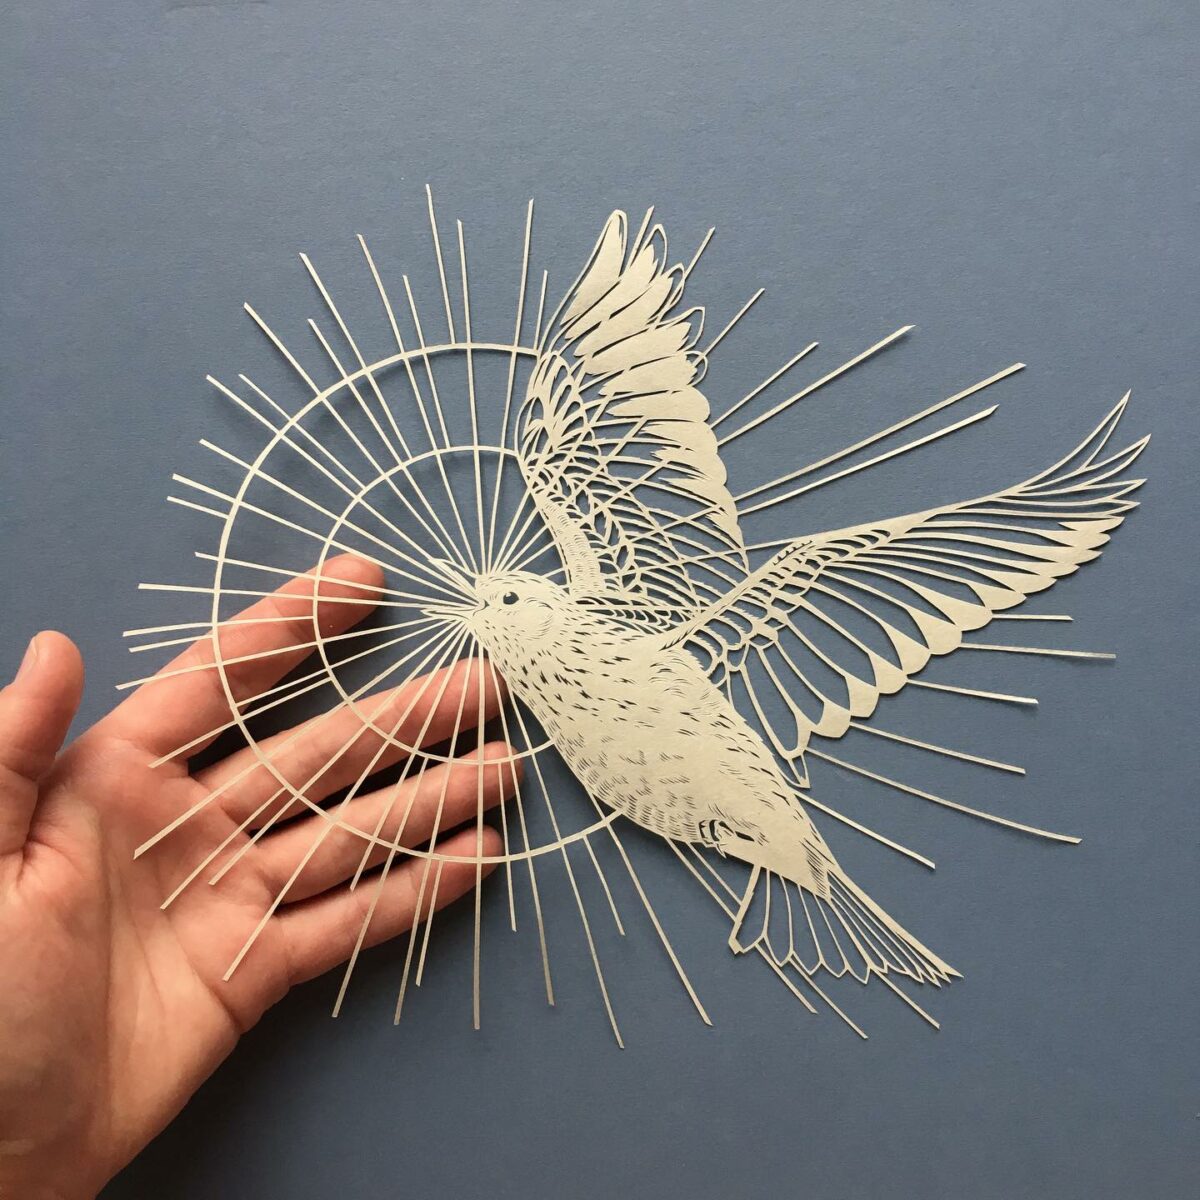 The minutely delicate paper cuttings of Elin Price